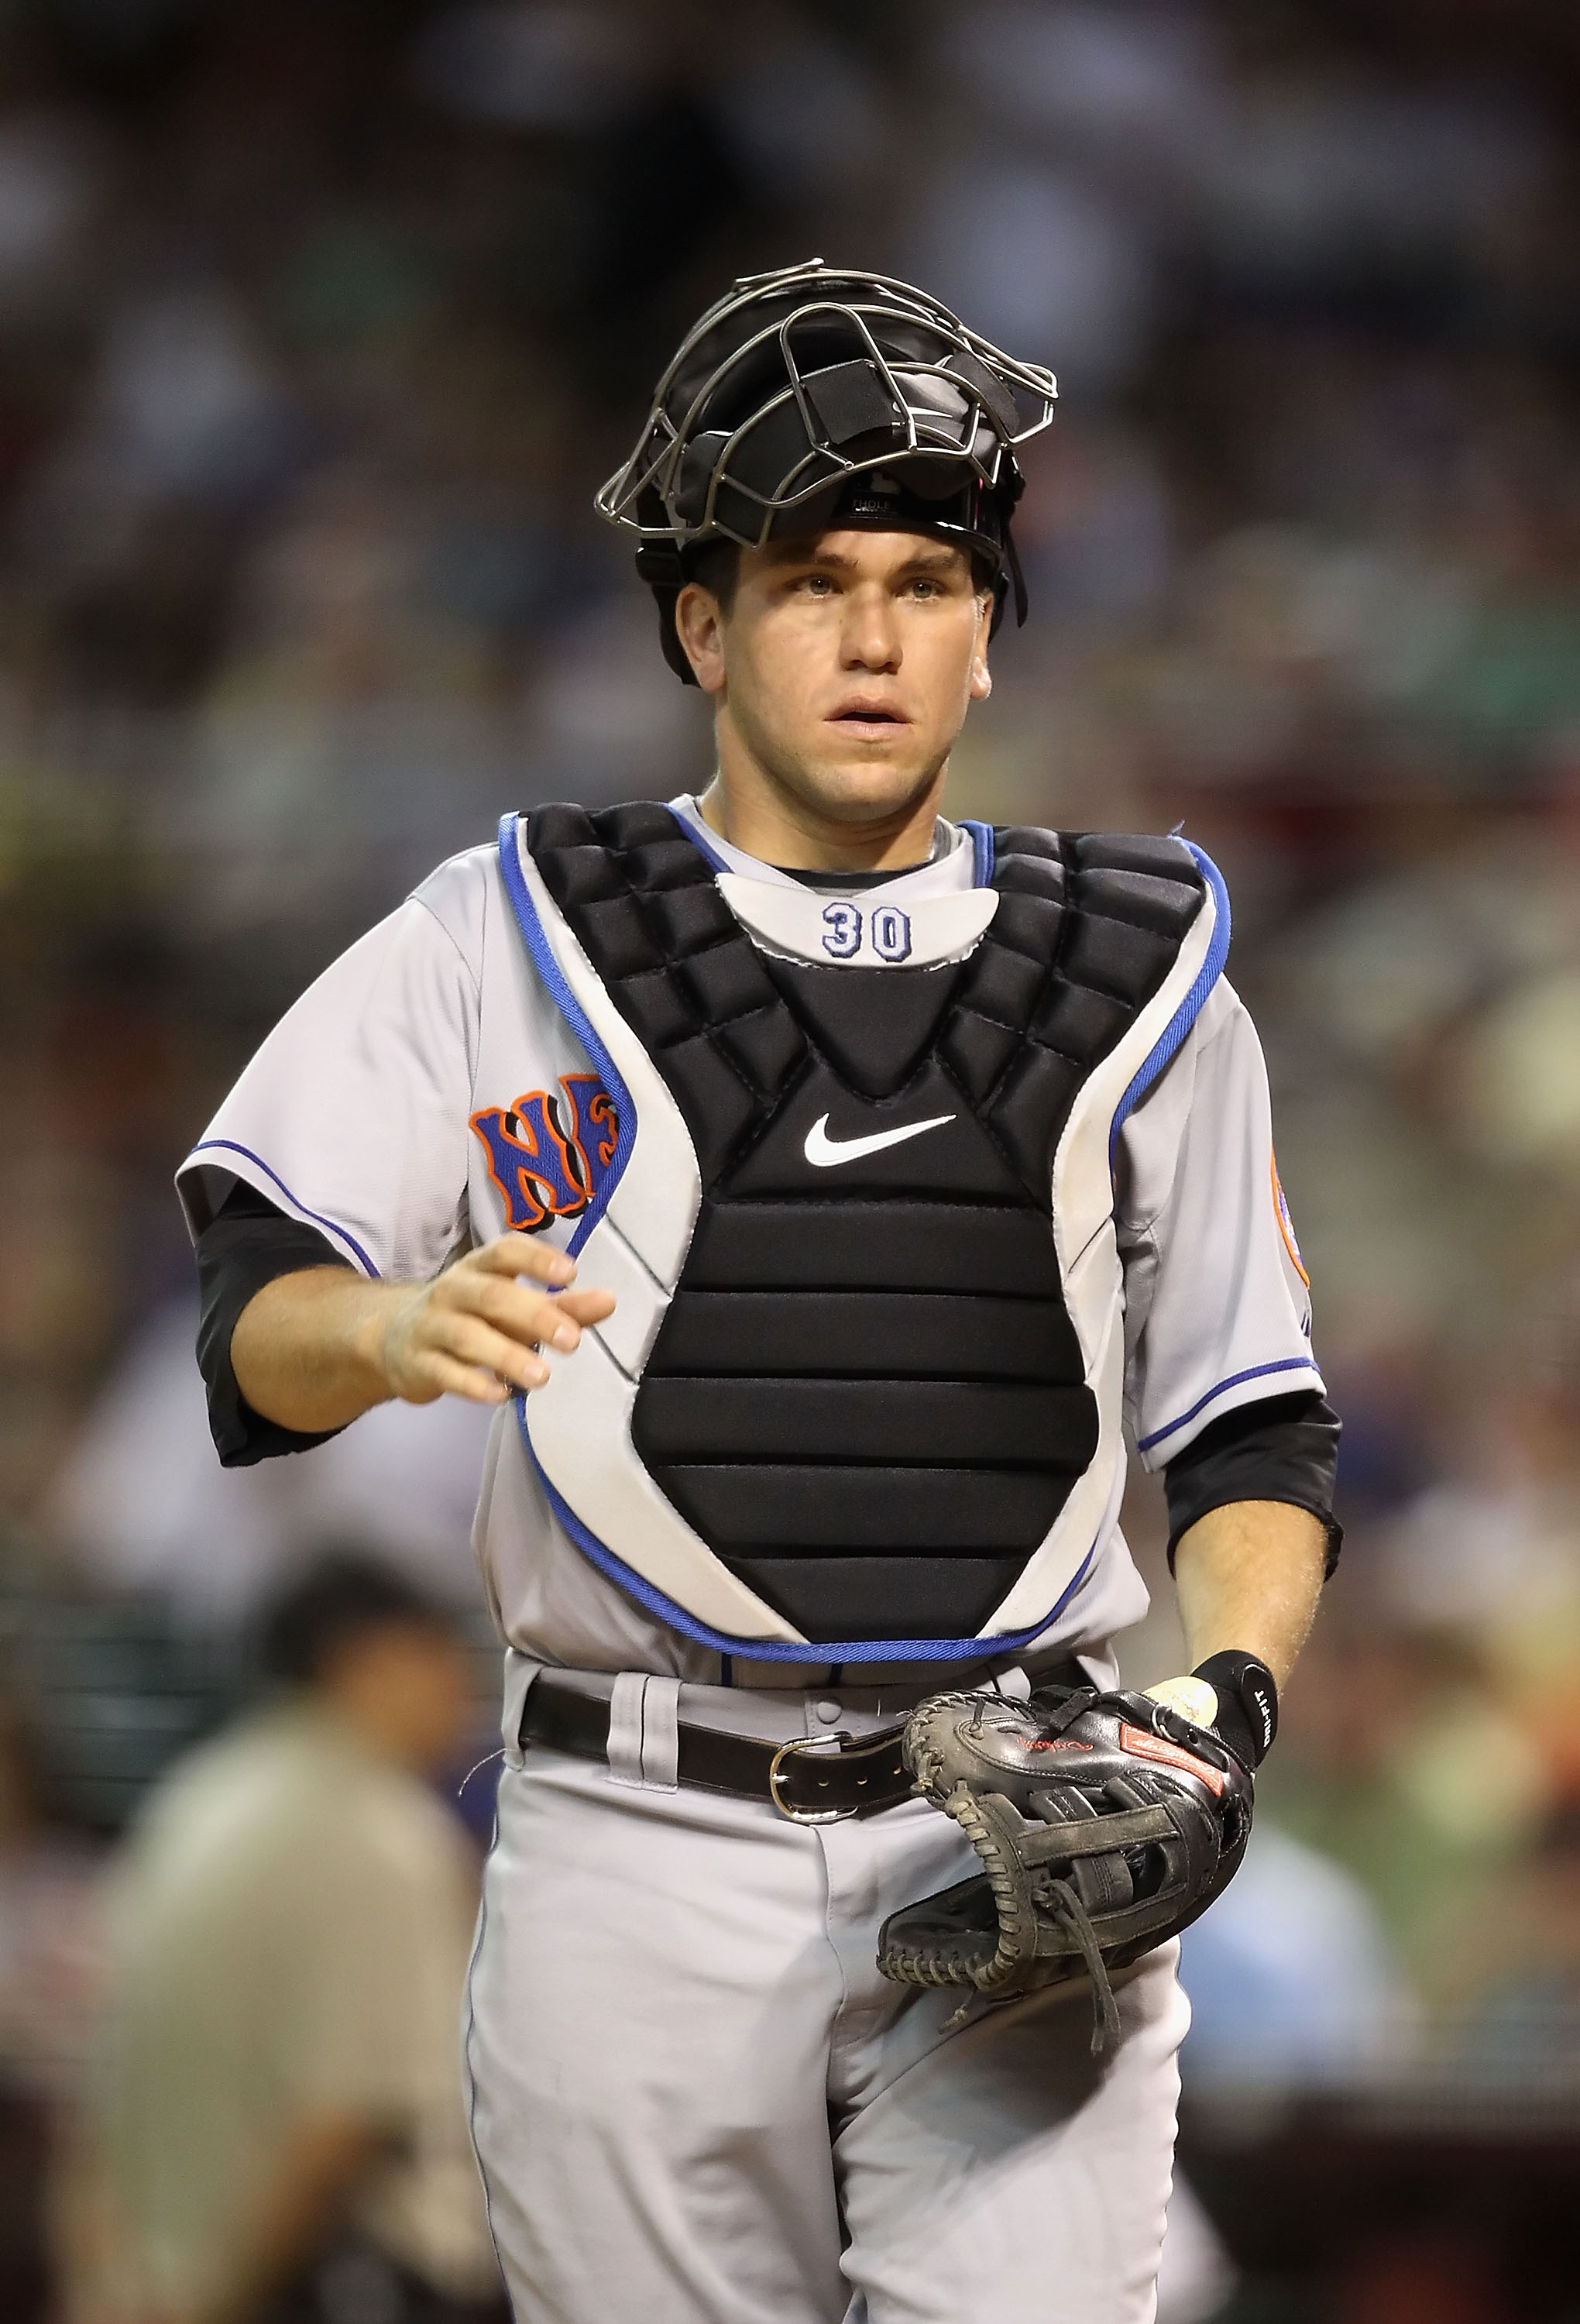 For Mets now, focus is on David Wright, Jose Reyes and others 